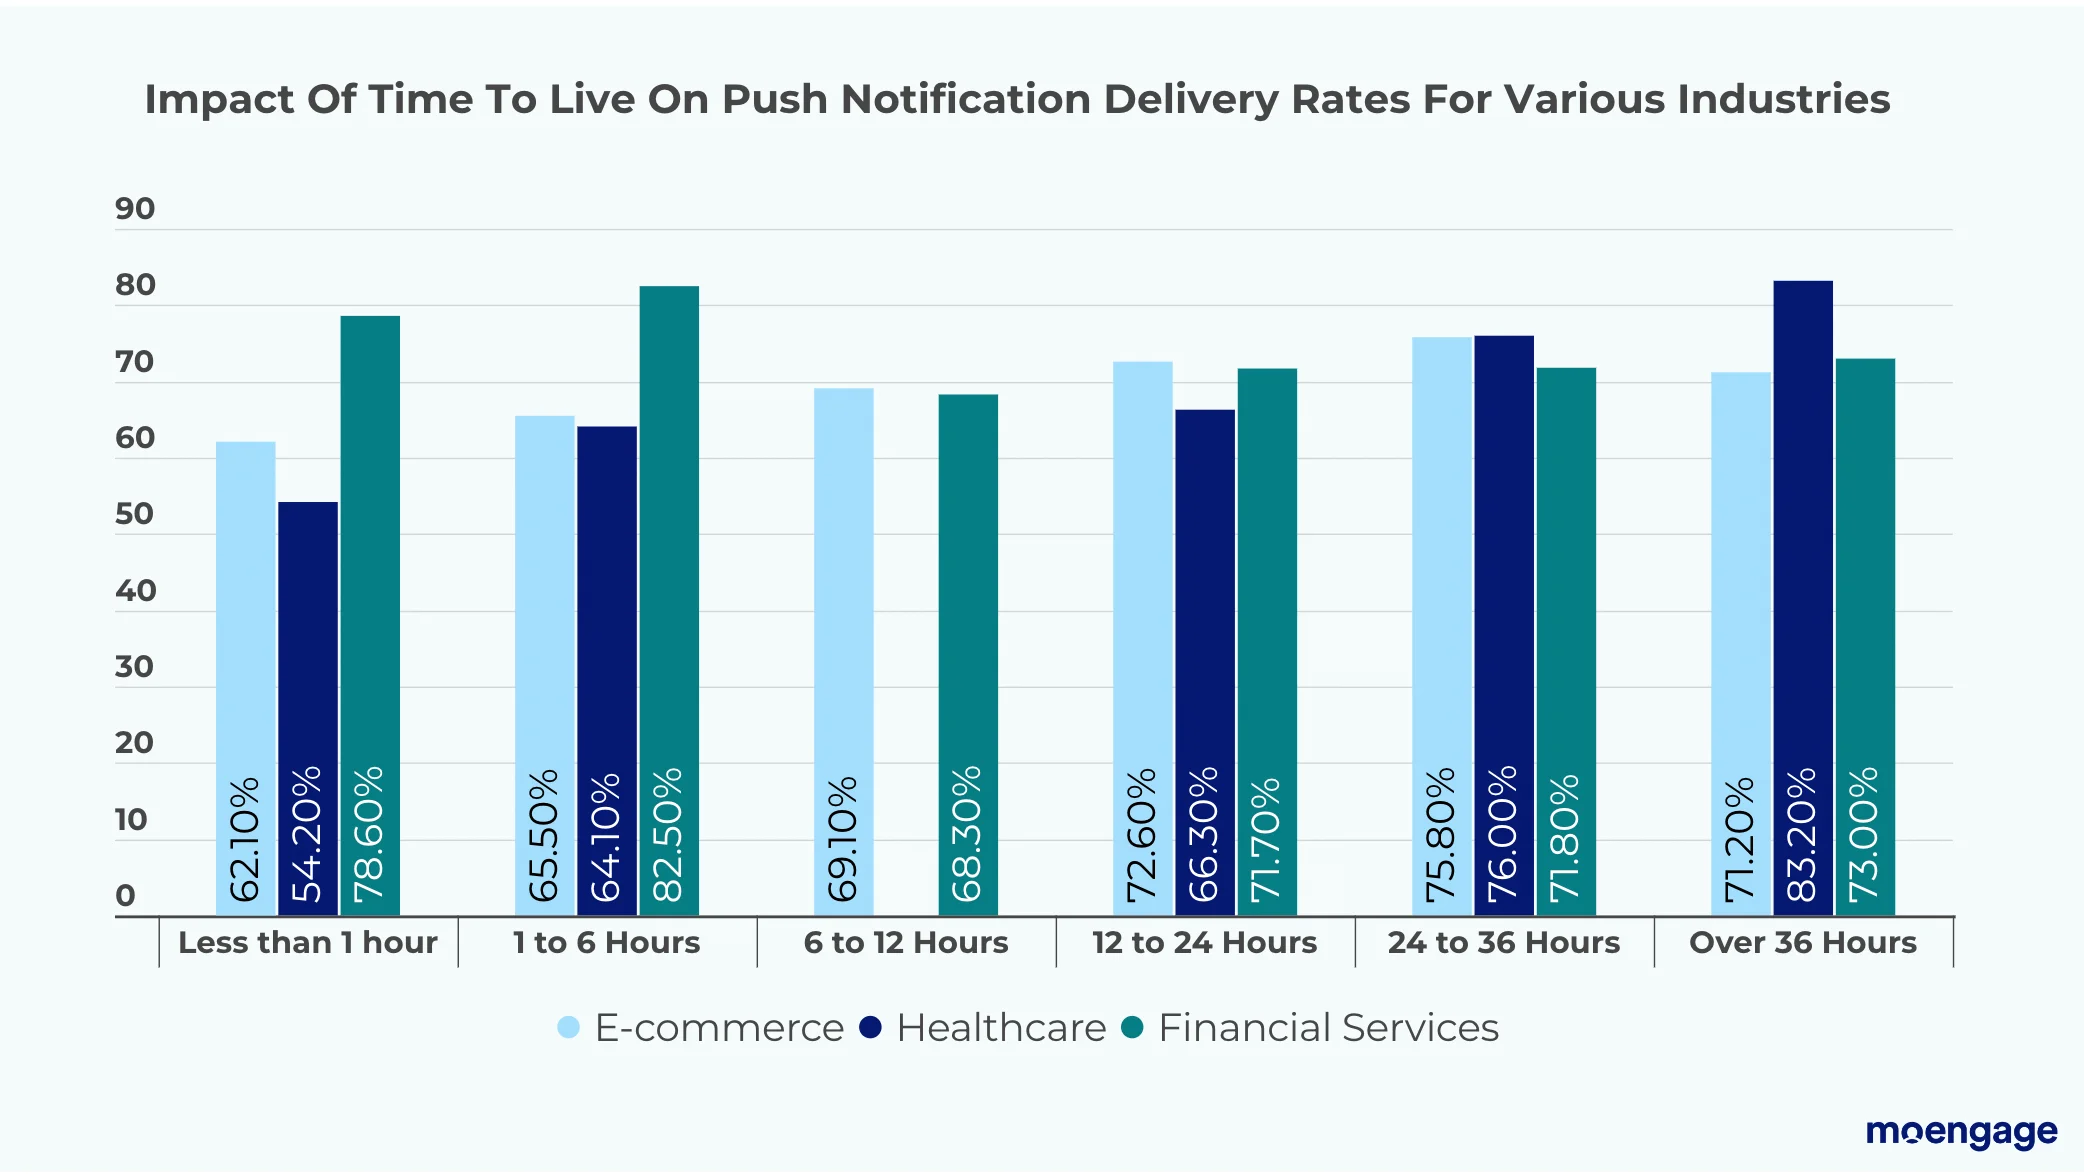 Impact of time to live on push notification delivery rate for various industries